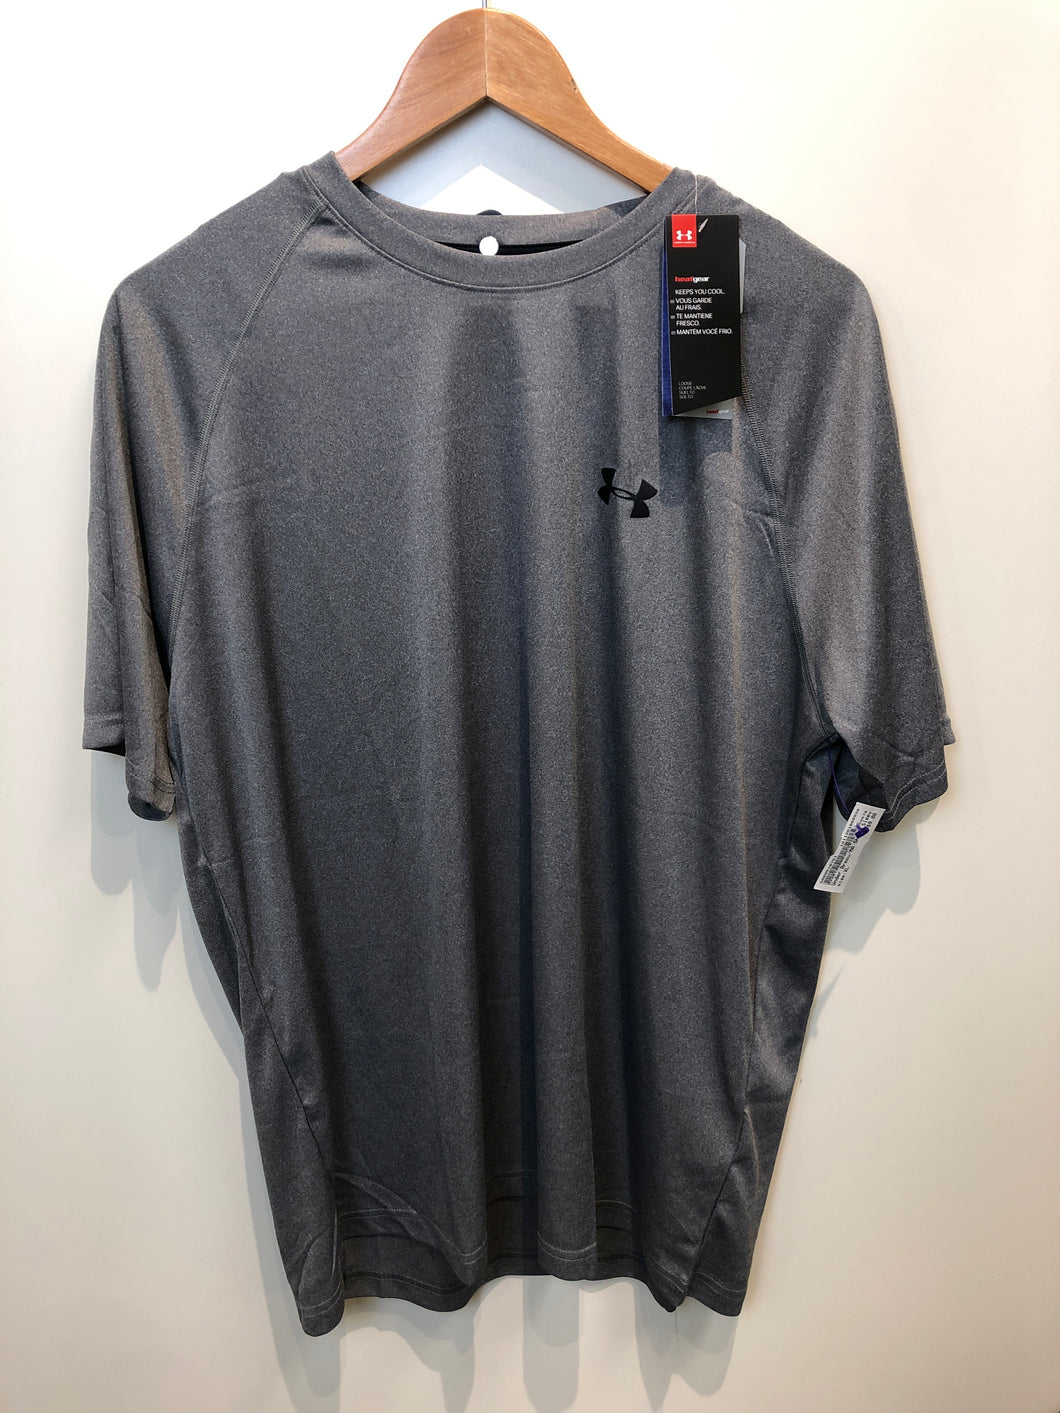 Under Armour Mens Athletic Top Size Extra Large